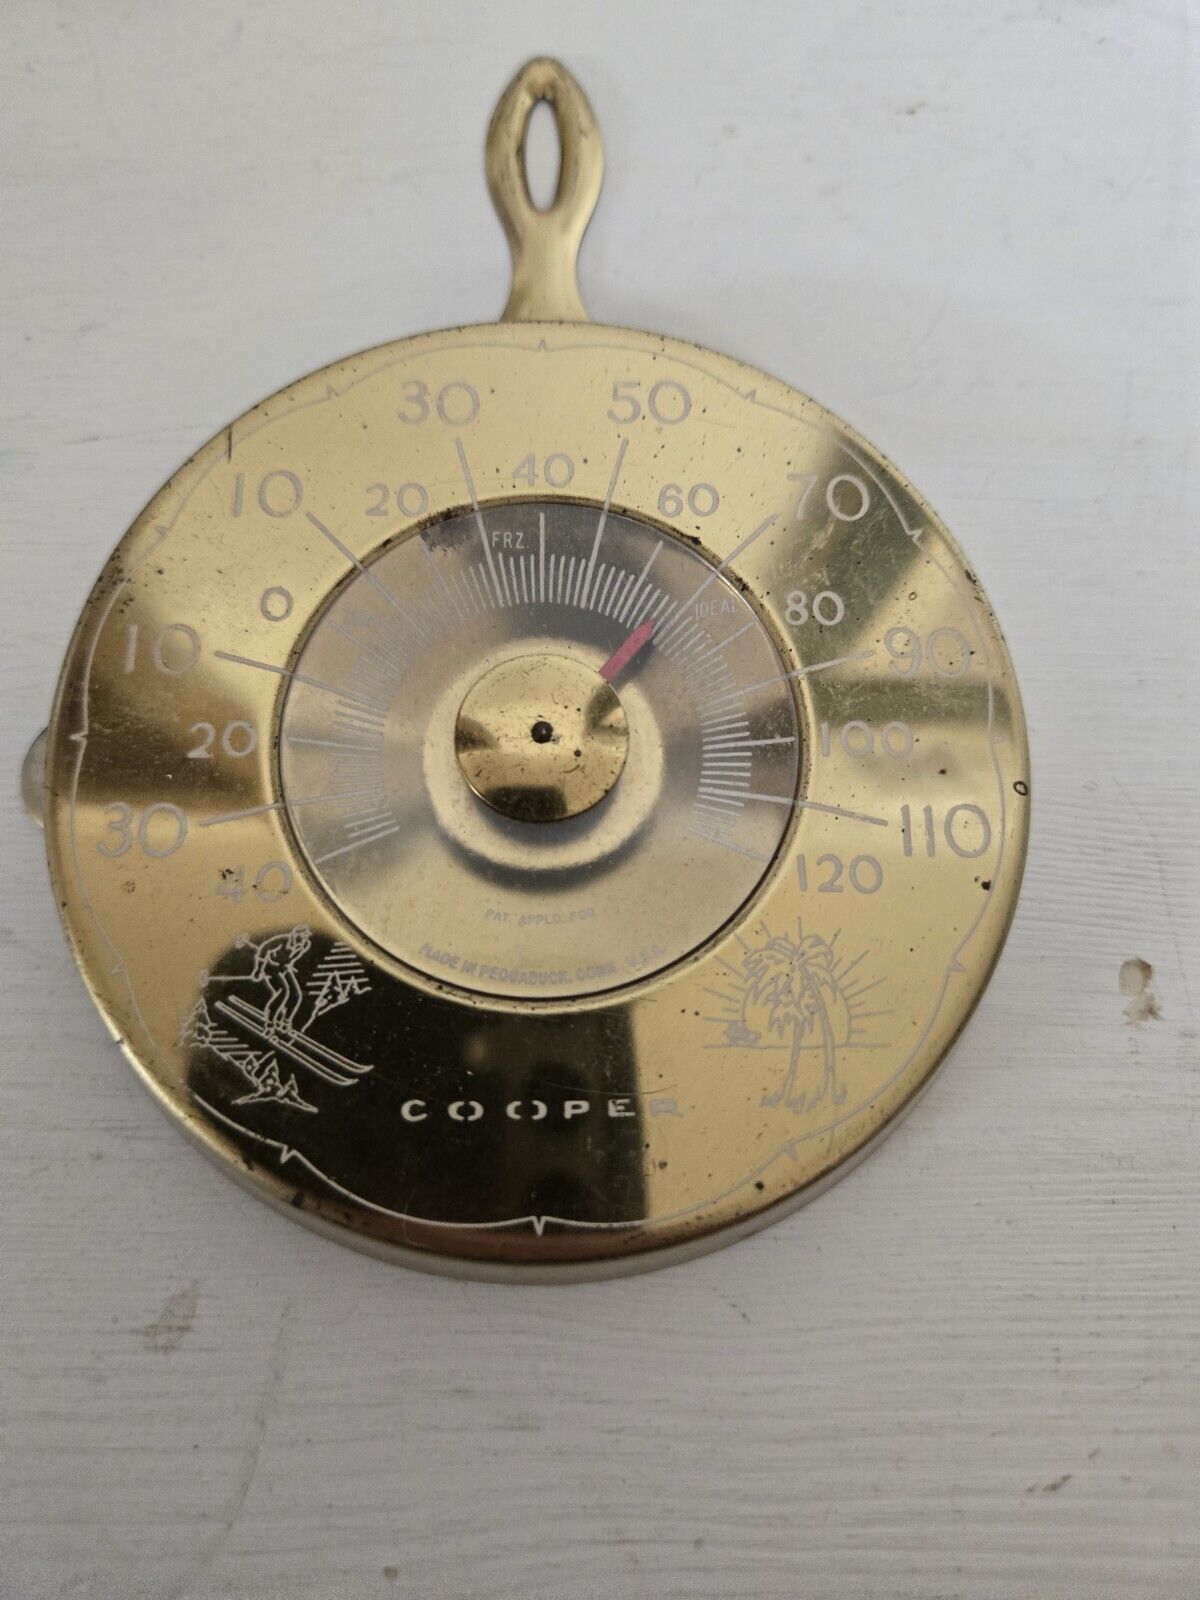 Vintage Cooper Fying Pan Thermometer - Gold Colored. Works. Made In USA. 